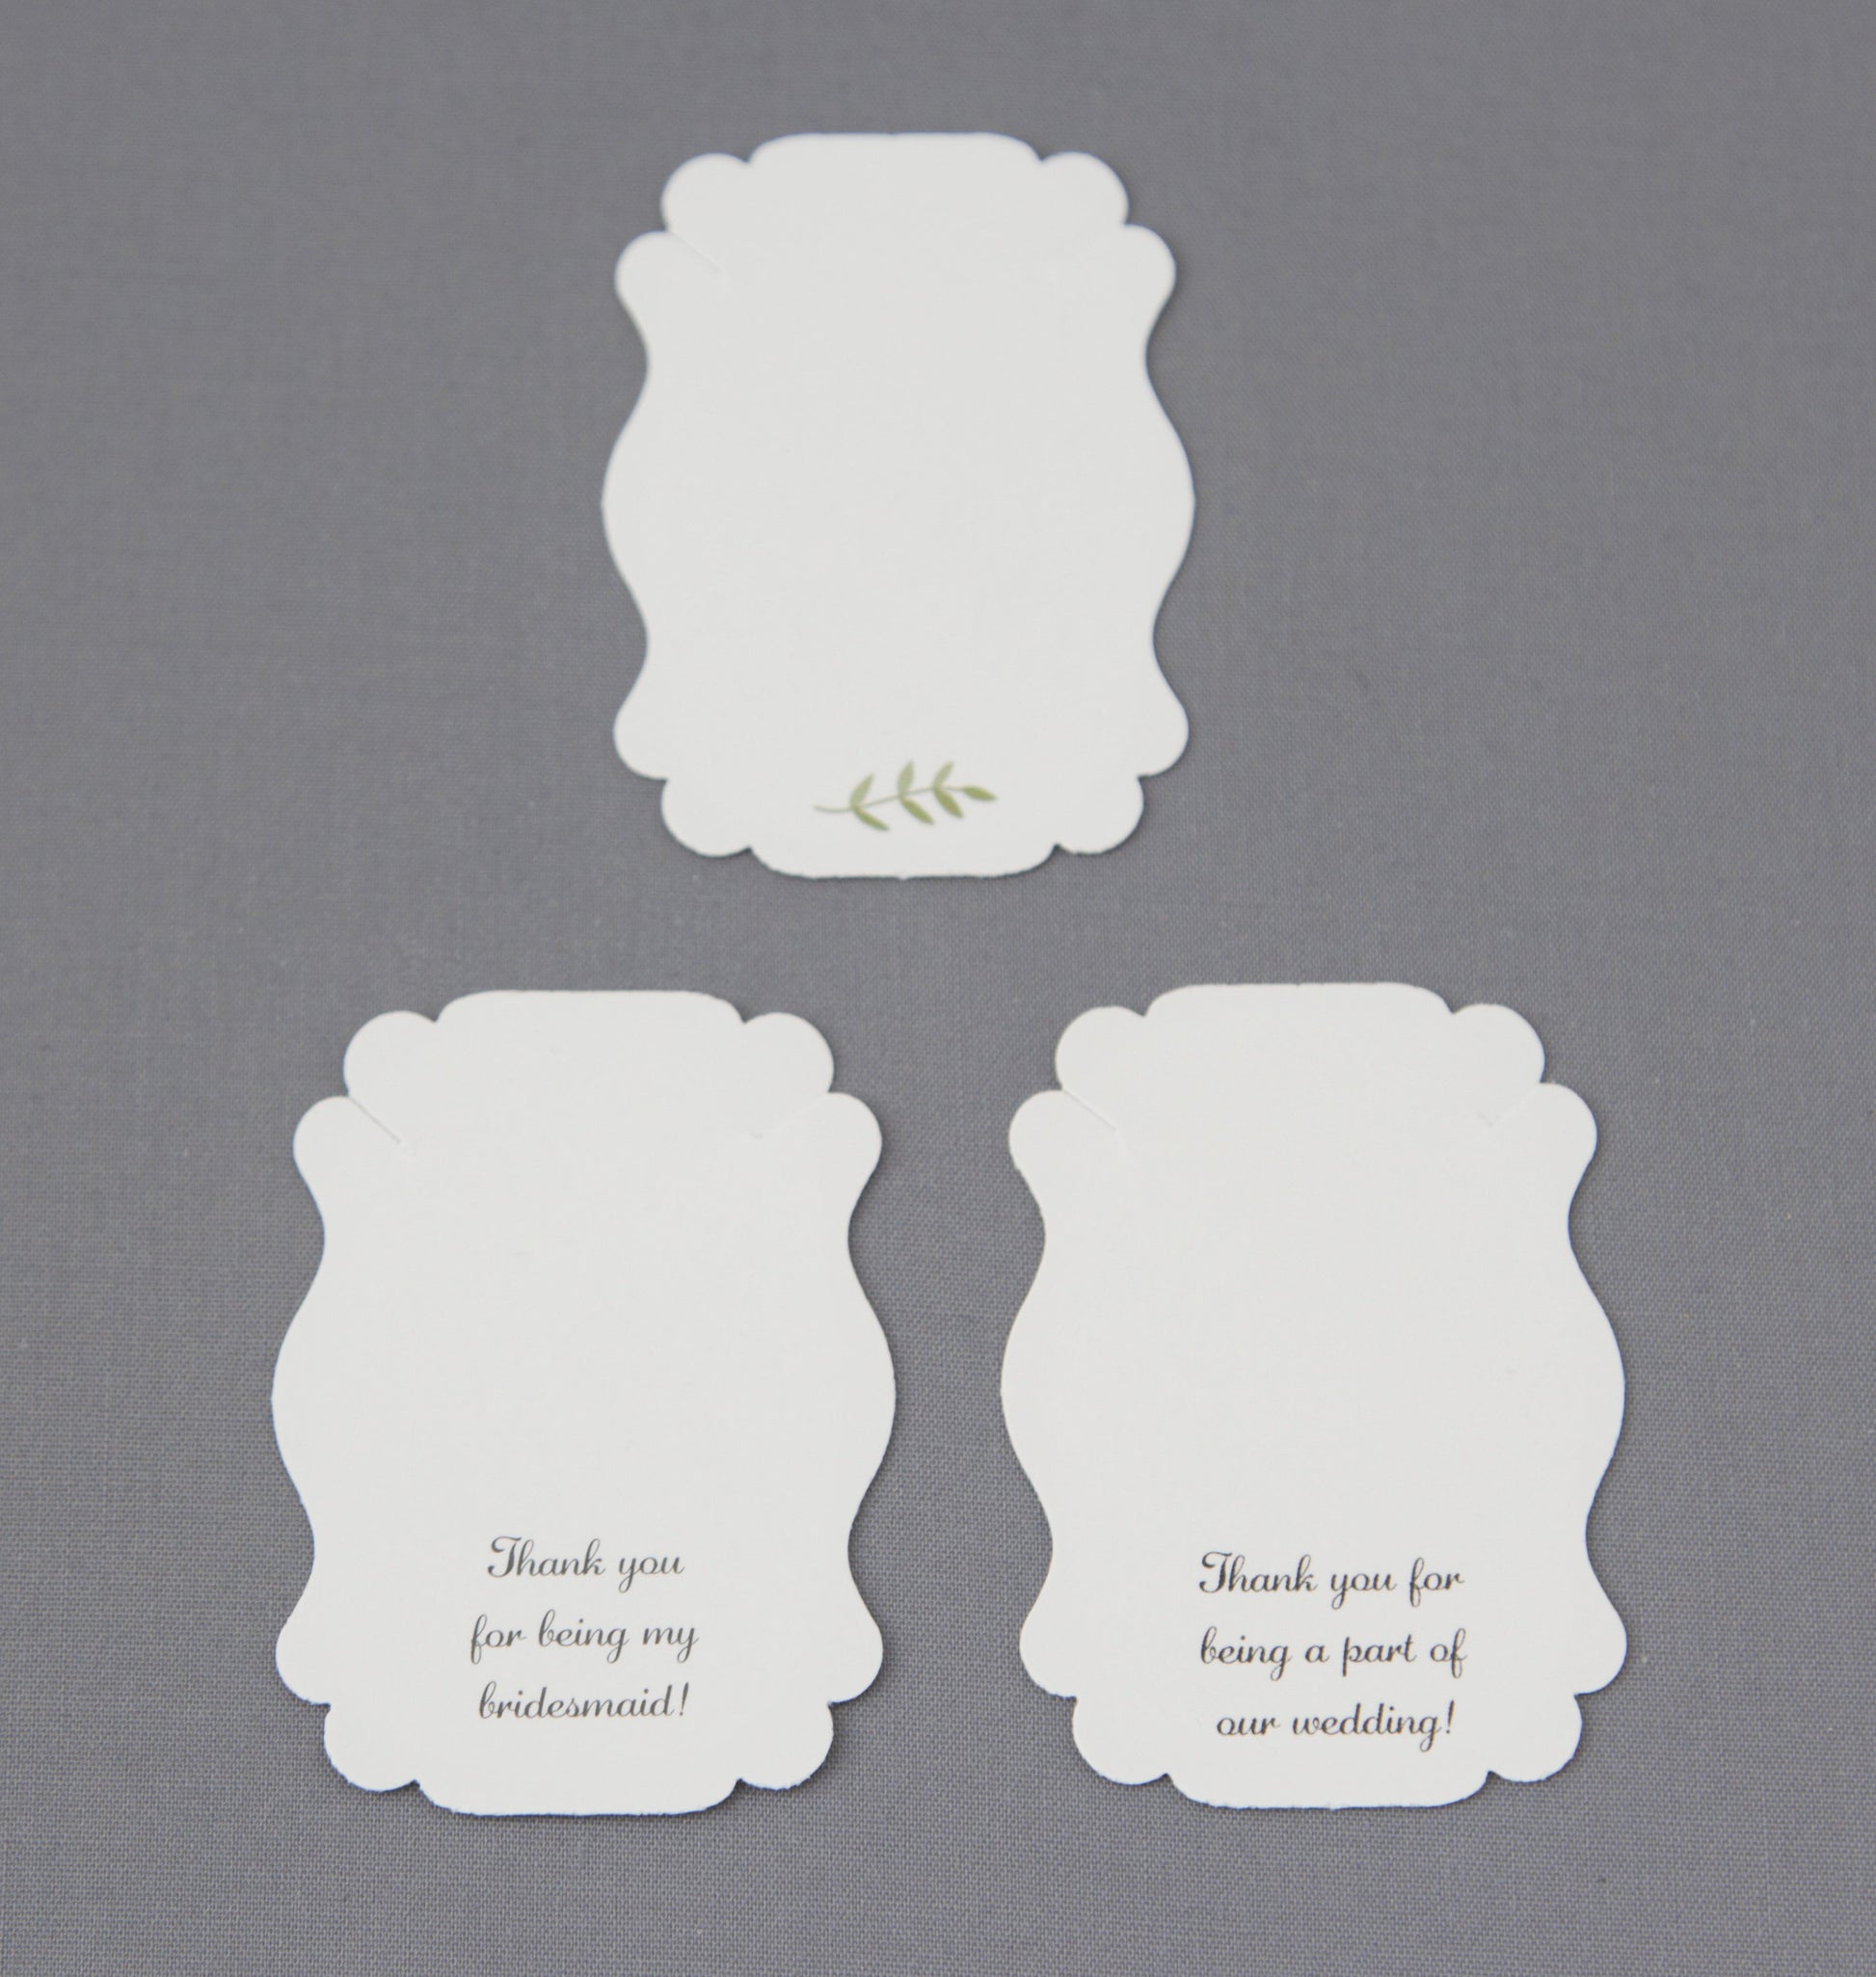 Bridesmaids gift cards